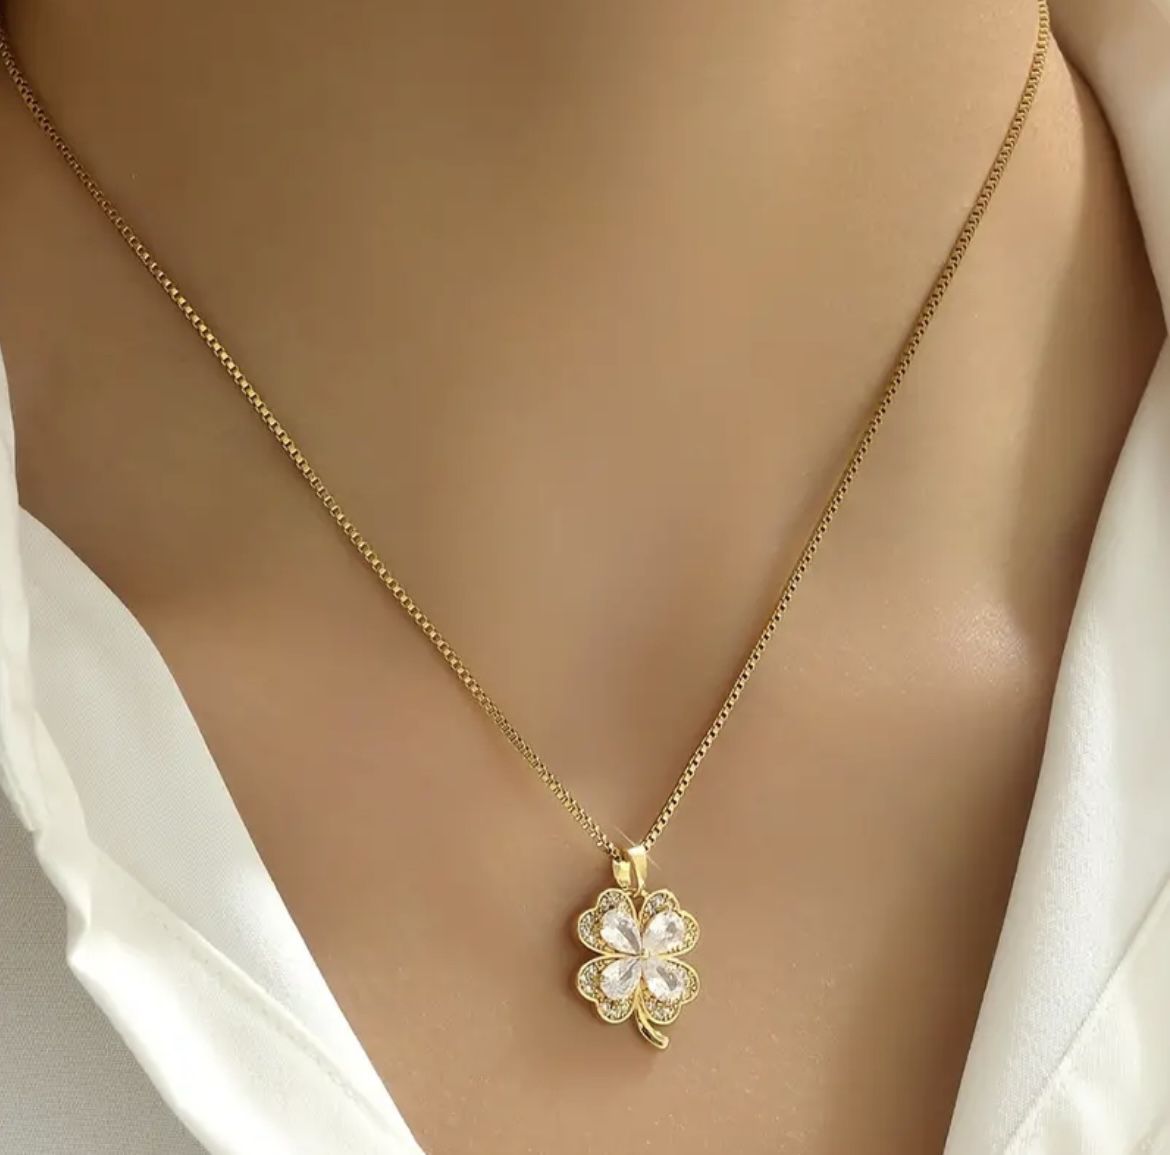 Mother's Day gift - Crystal clover necklace